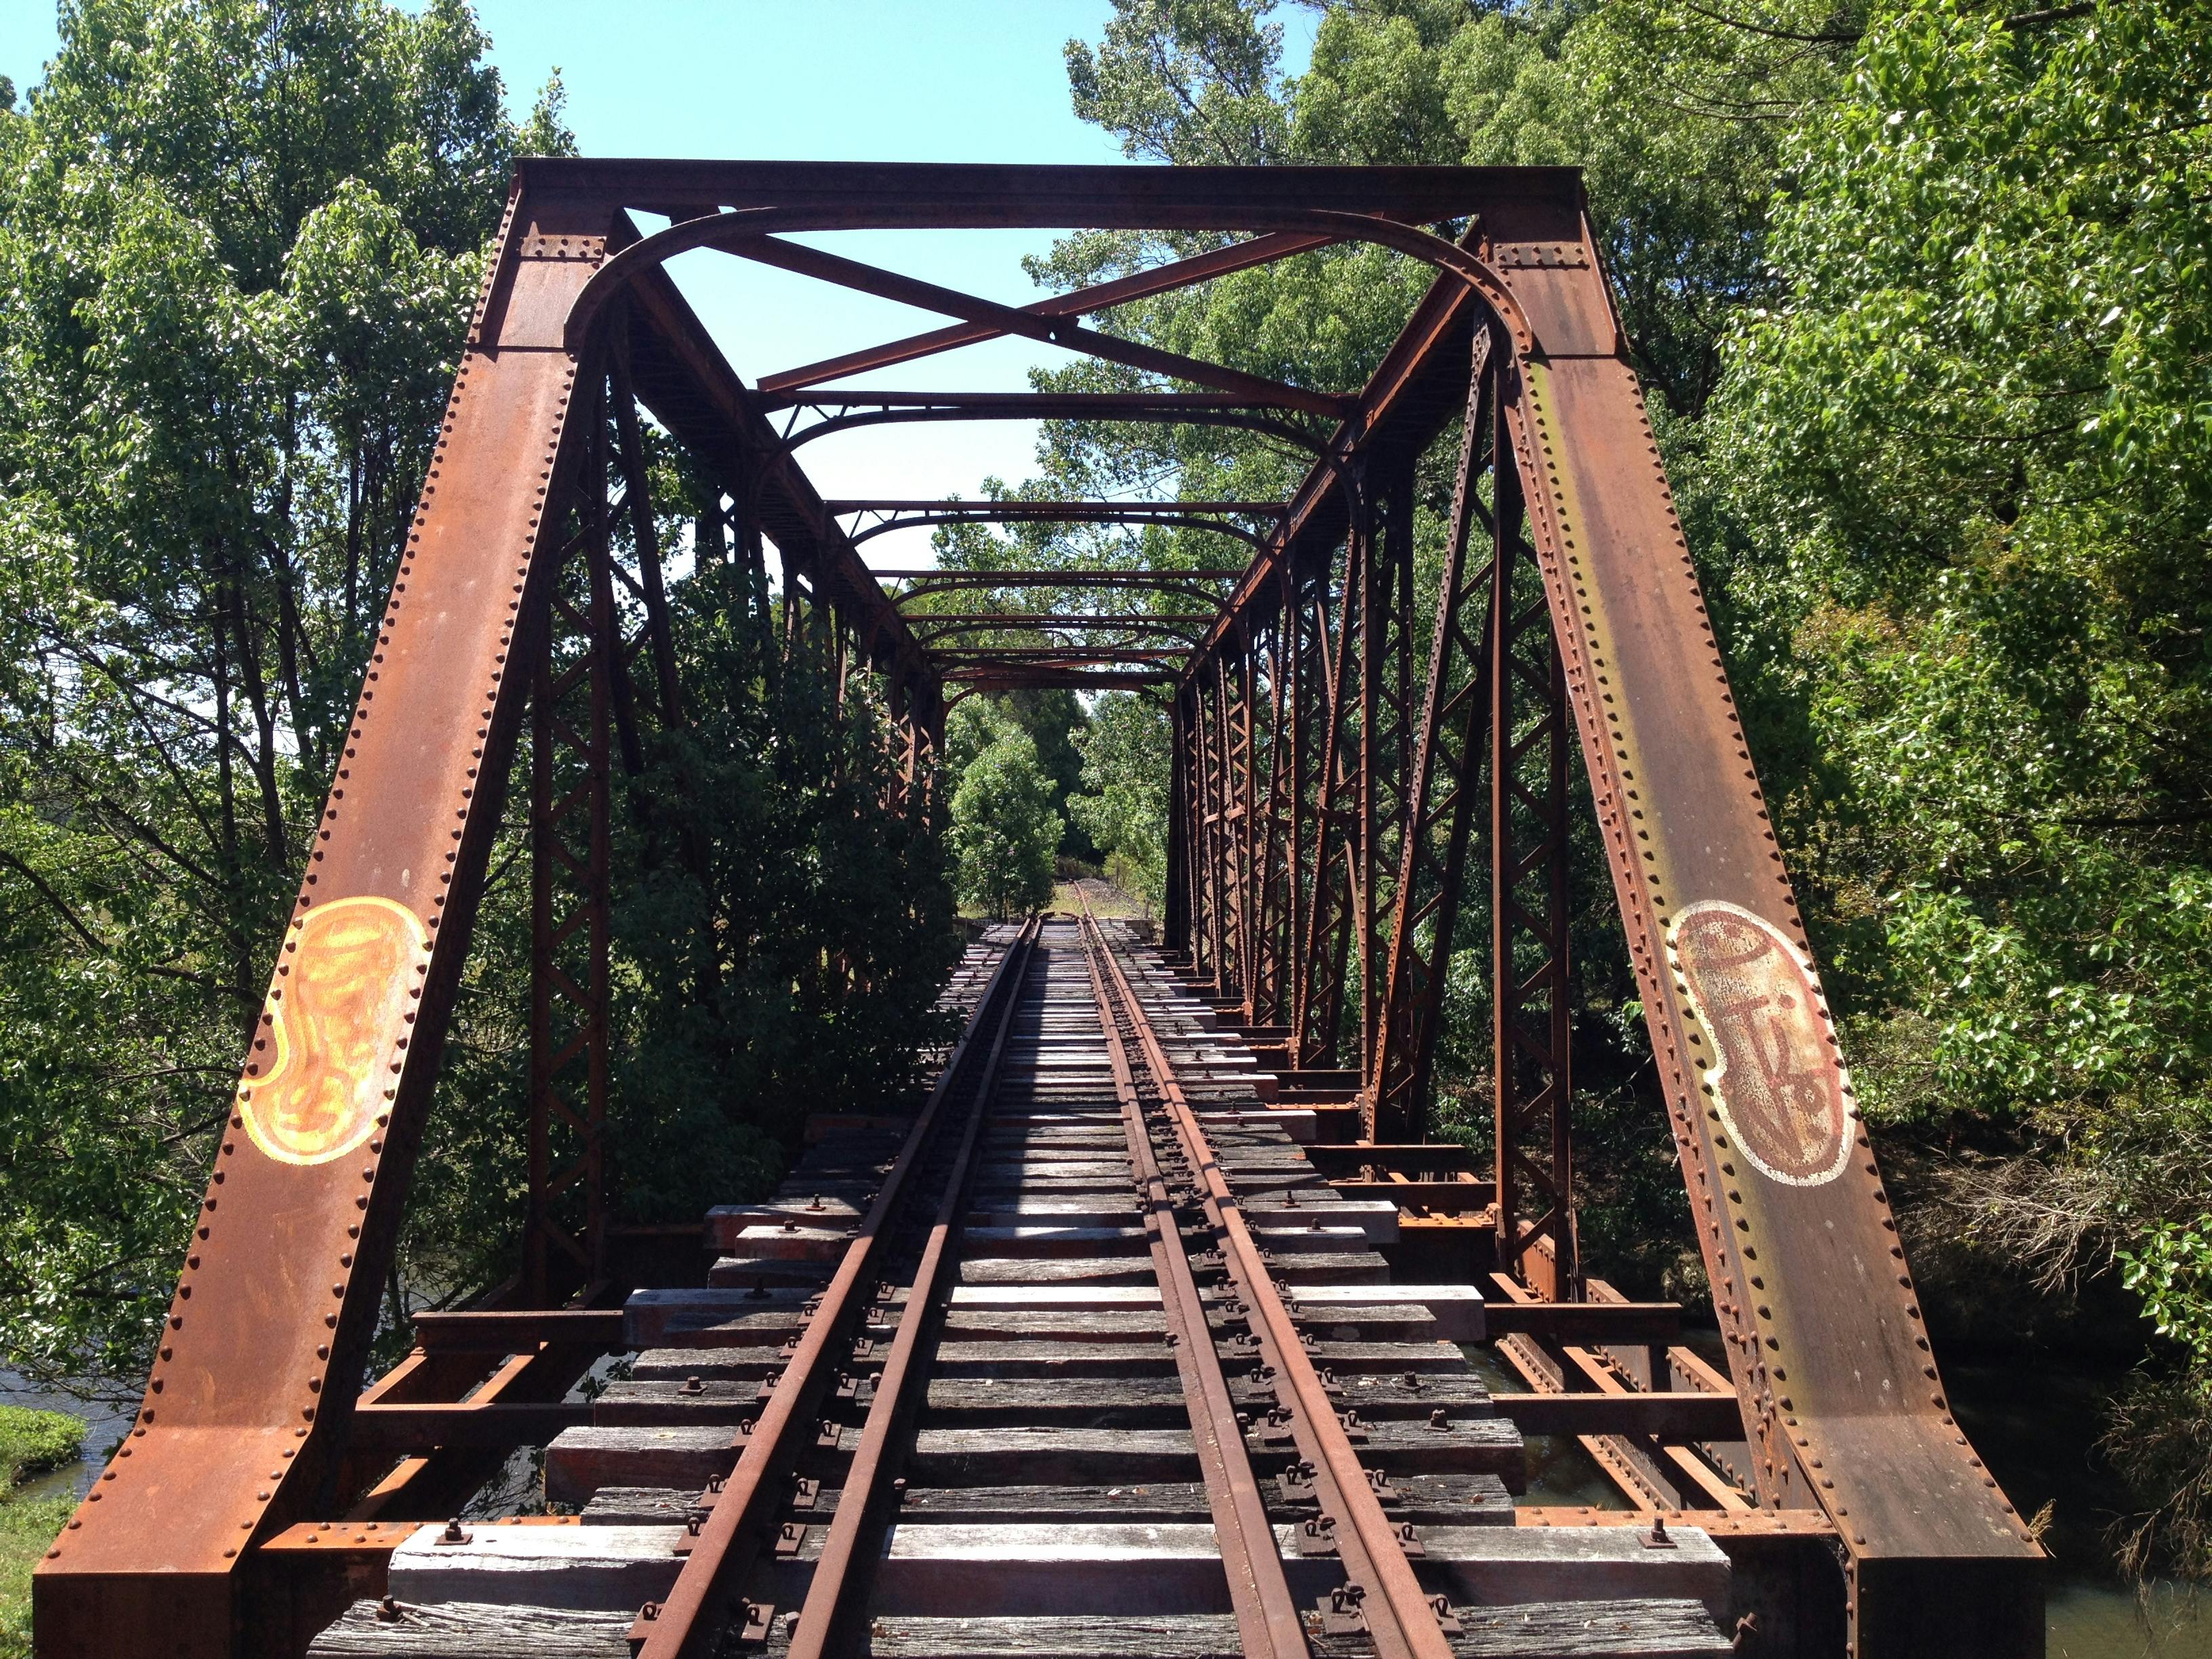 One of the many rail bridges along the trail